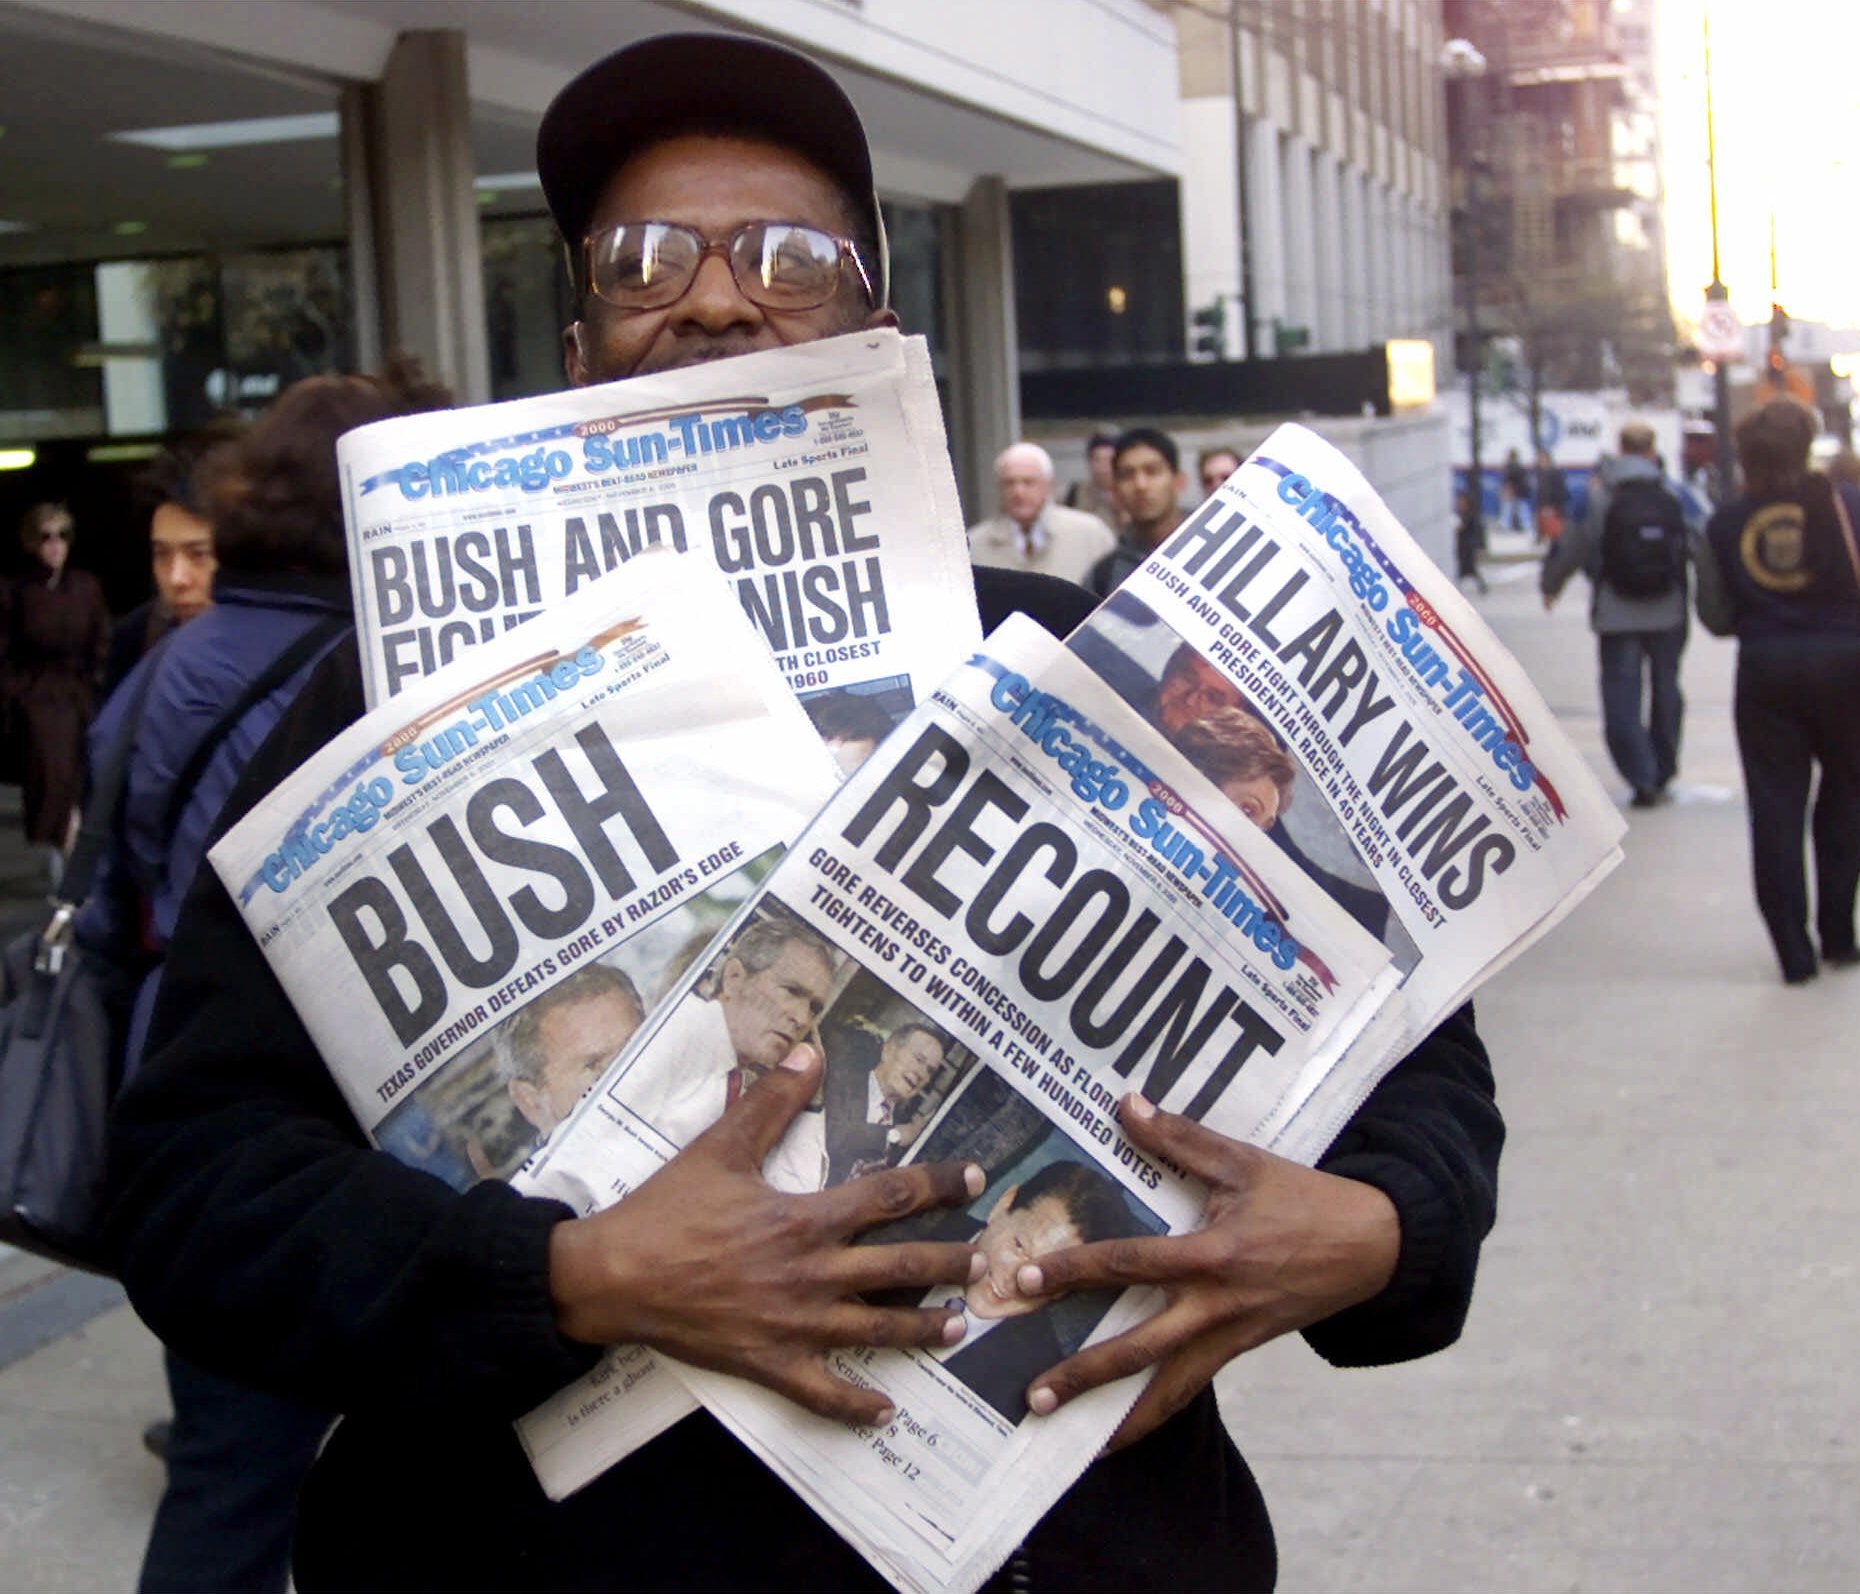 FILE - In this Nov. 8, 2000 file photo, Willie Smith holds four copies of the Chicago Sun-Times, each with a different headline, in Chicago, reflecting a night of suspense, drama and changes in following the presidential race between Vice President Al Gore and Texas Gov. George W. Bush. What happens if America wakes up on Nov. 9 to a disputed presidential election in which the outcome turns on the results of a razor-thin margin in one or two states, one candidate seeks a recount and the other goes to court? (AP Photo/Charles Bennett, File)